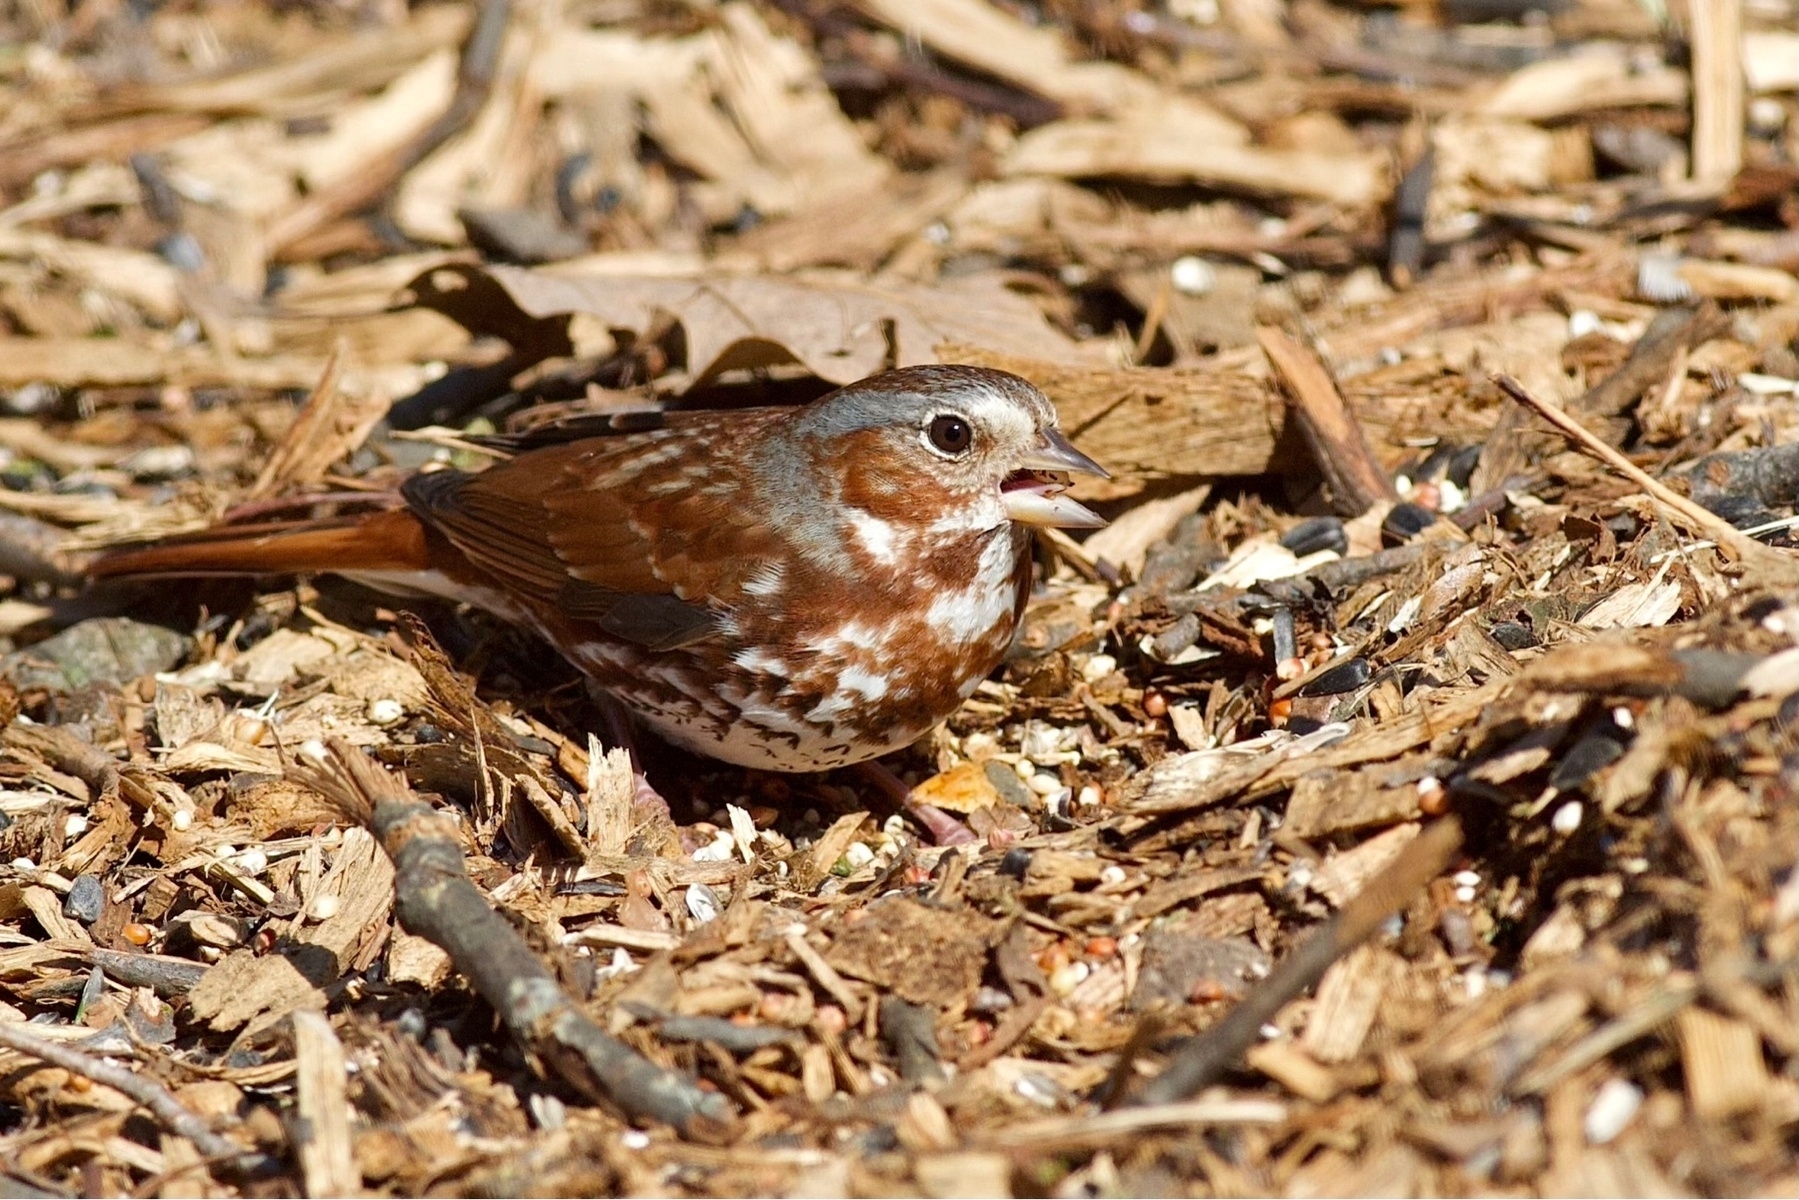 A primarily brownish orange bird with white speckled chest and small bands of gray along the side and back of its head is foraging for seeds amongst a woodchip mulch covered ground.